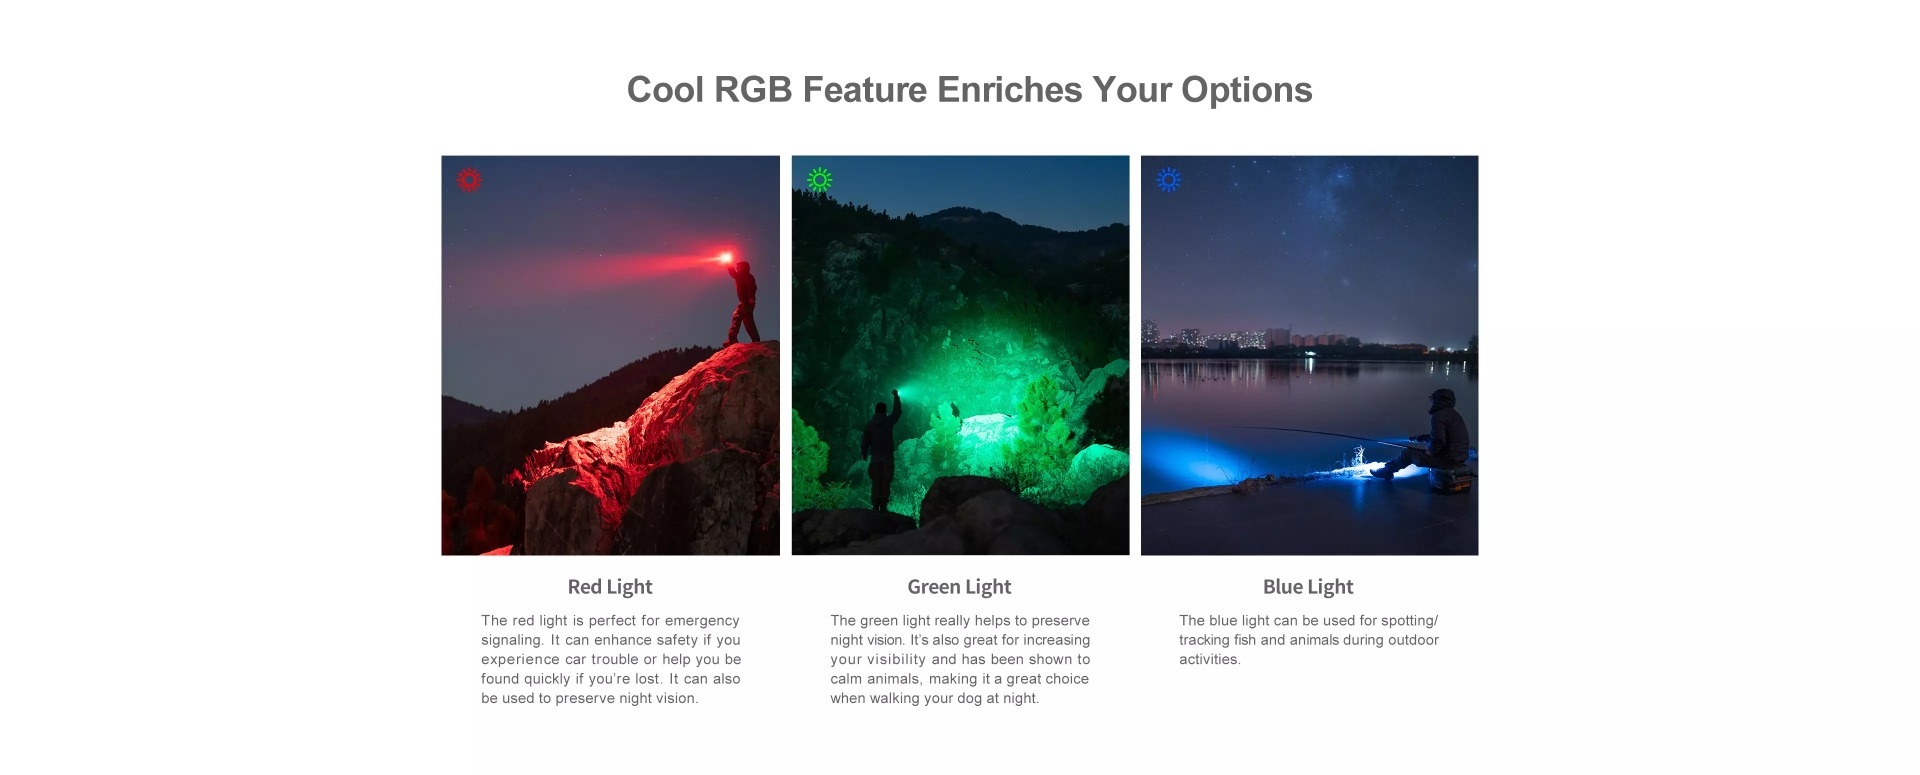 Cool RGB feature enriches your options 